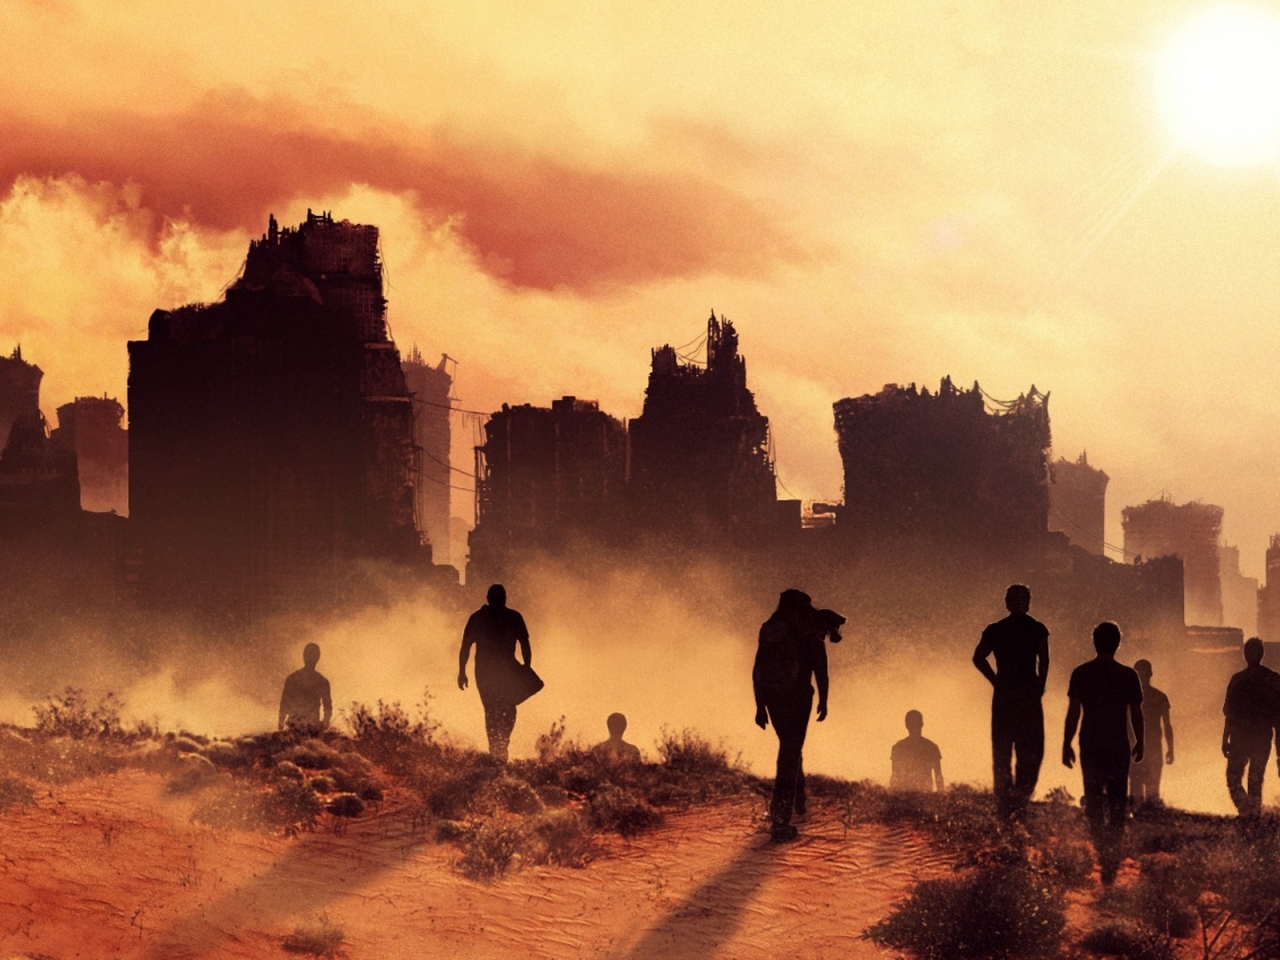 Maze Runner The Scorch Trials Silhouettes for 1280 x 960 resolution